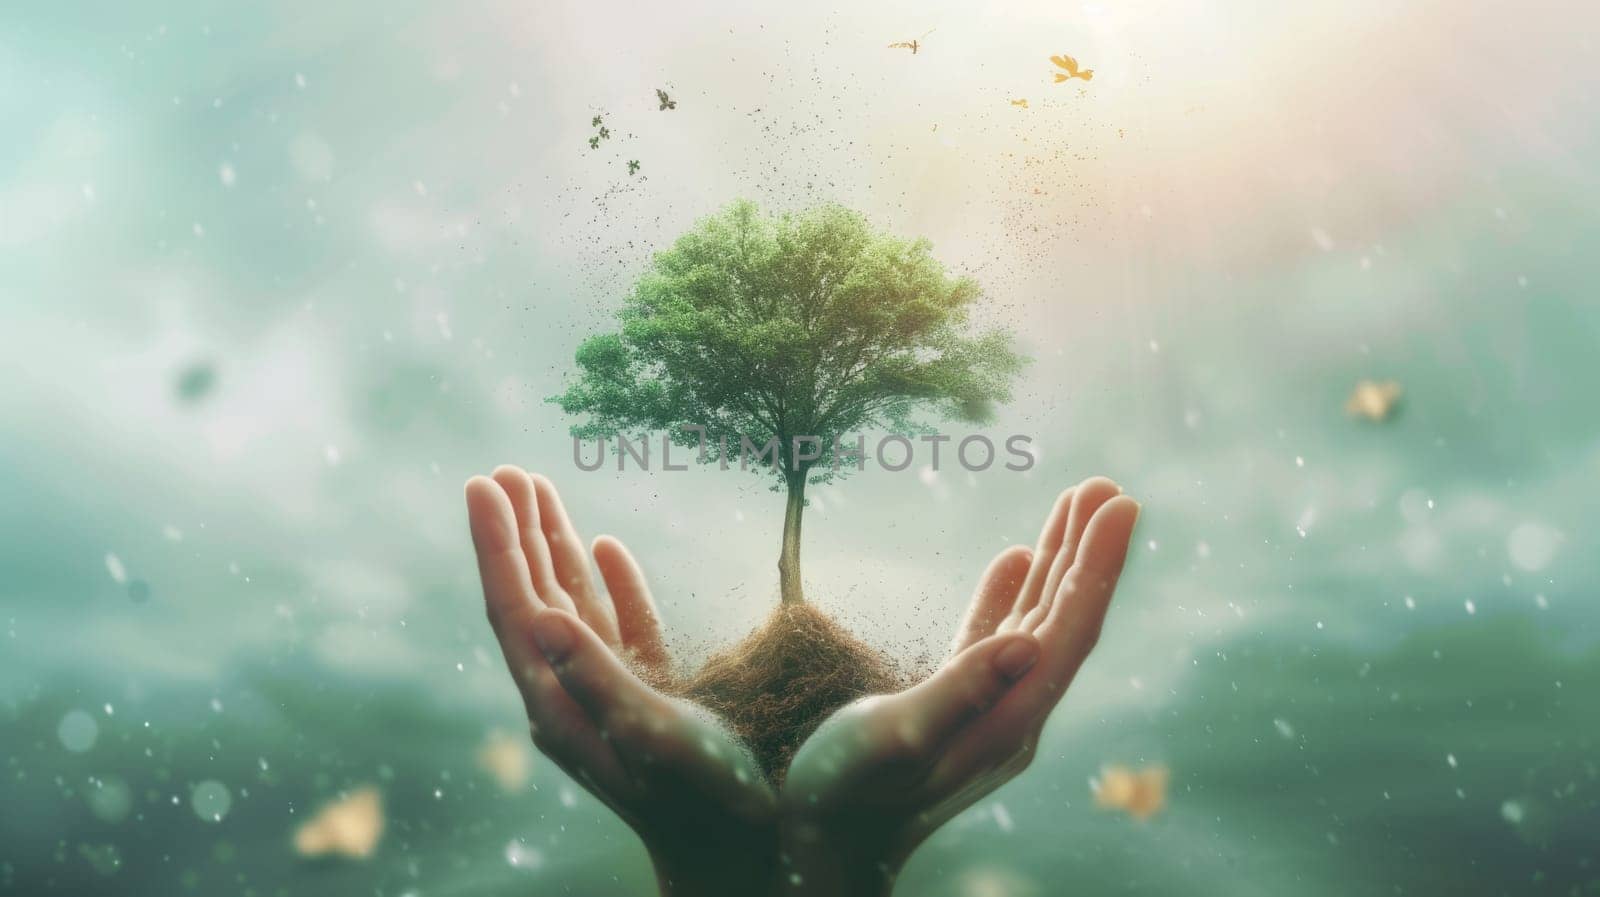 Conceptual image of a tree flourishing from soil held in human hands, symbolizing growth and environmental care. AIG41